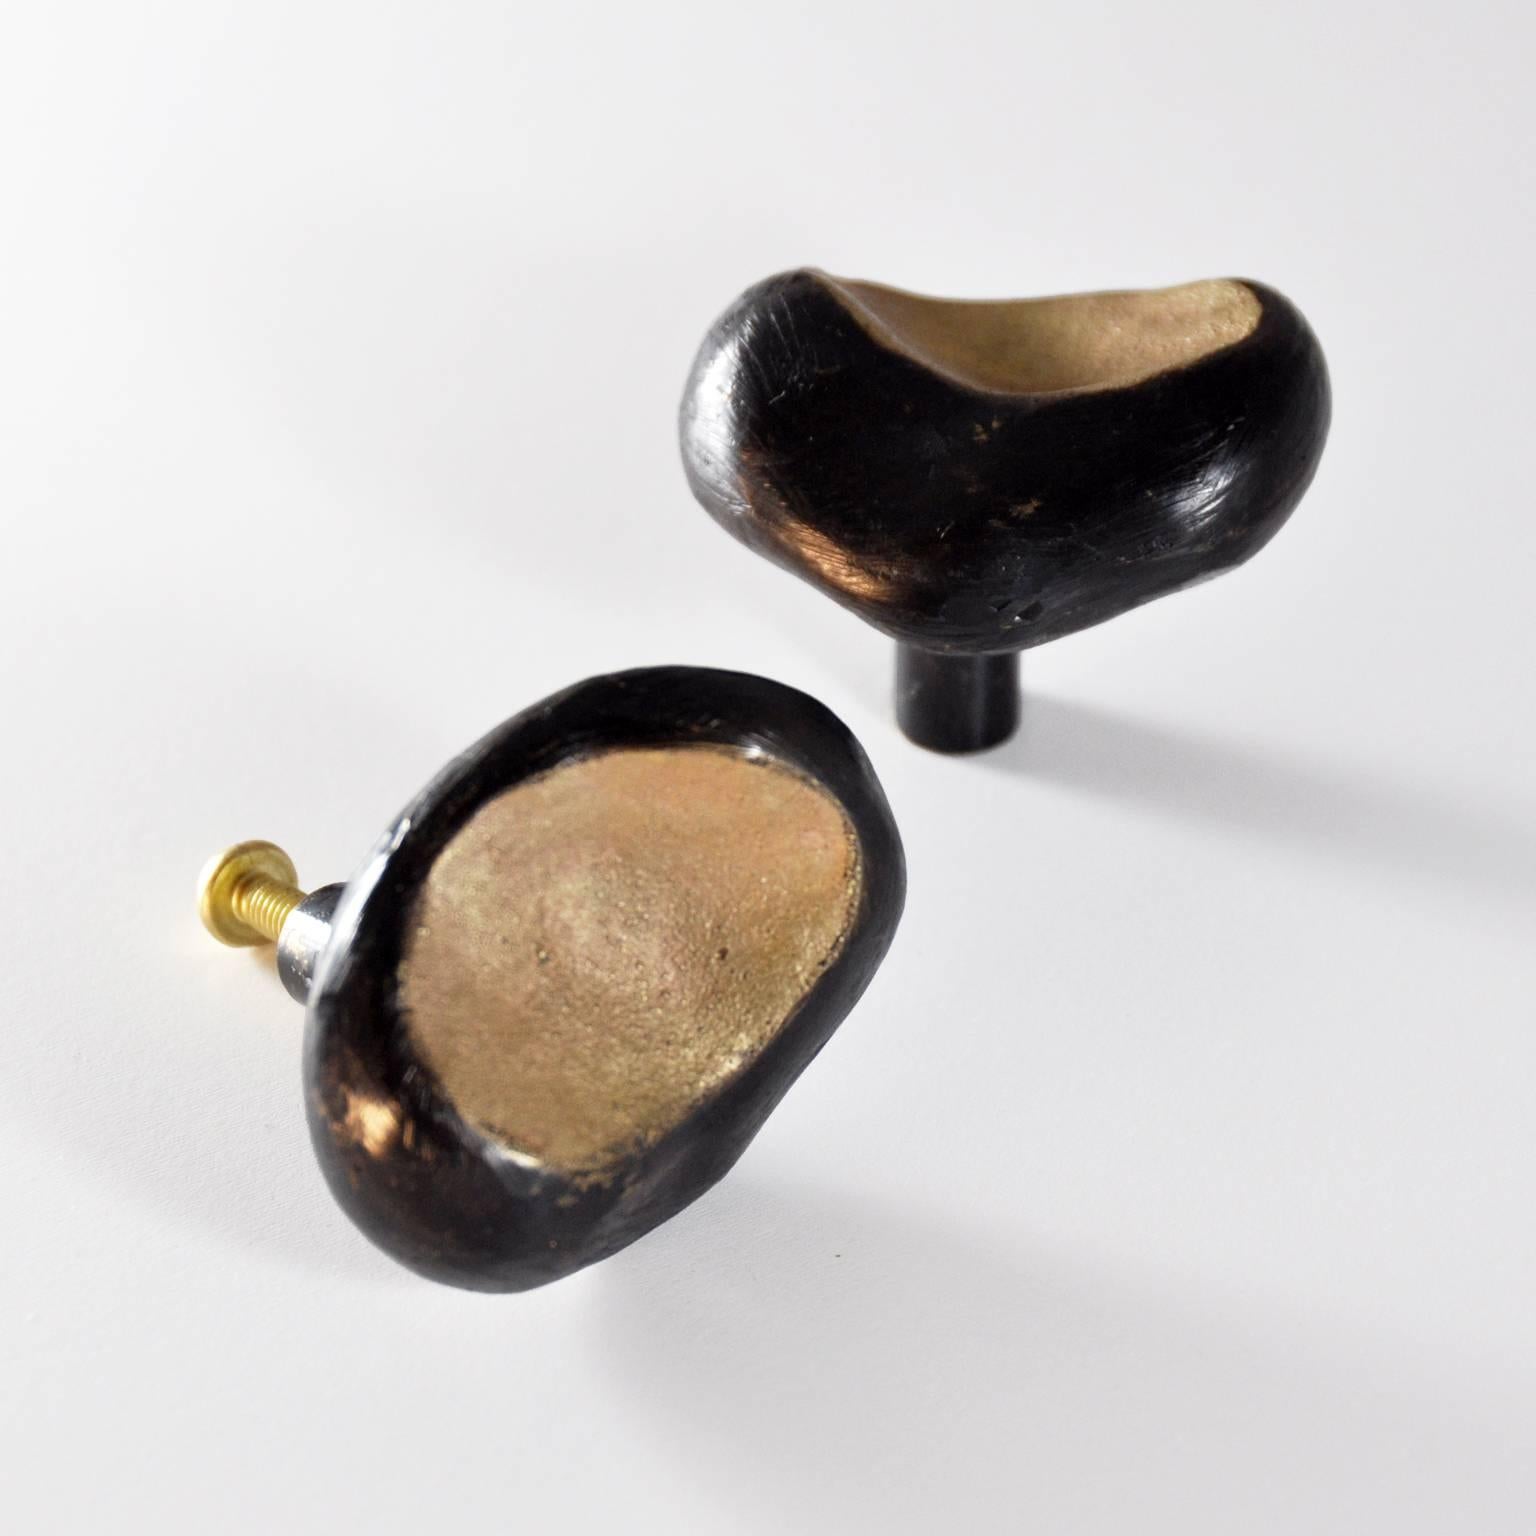 Made from solid brass, the Ava Drawer Pull is sand cast before being hand carved, blackened, and lacquered in Portland, Oregon. 

Thread: 8-32, includes installation screw.